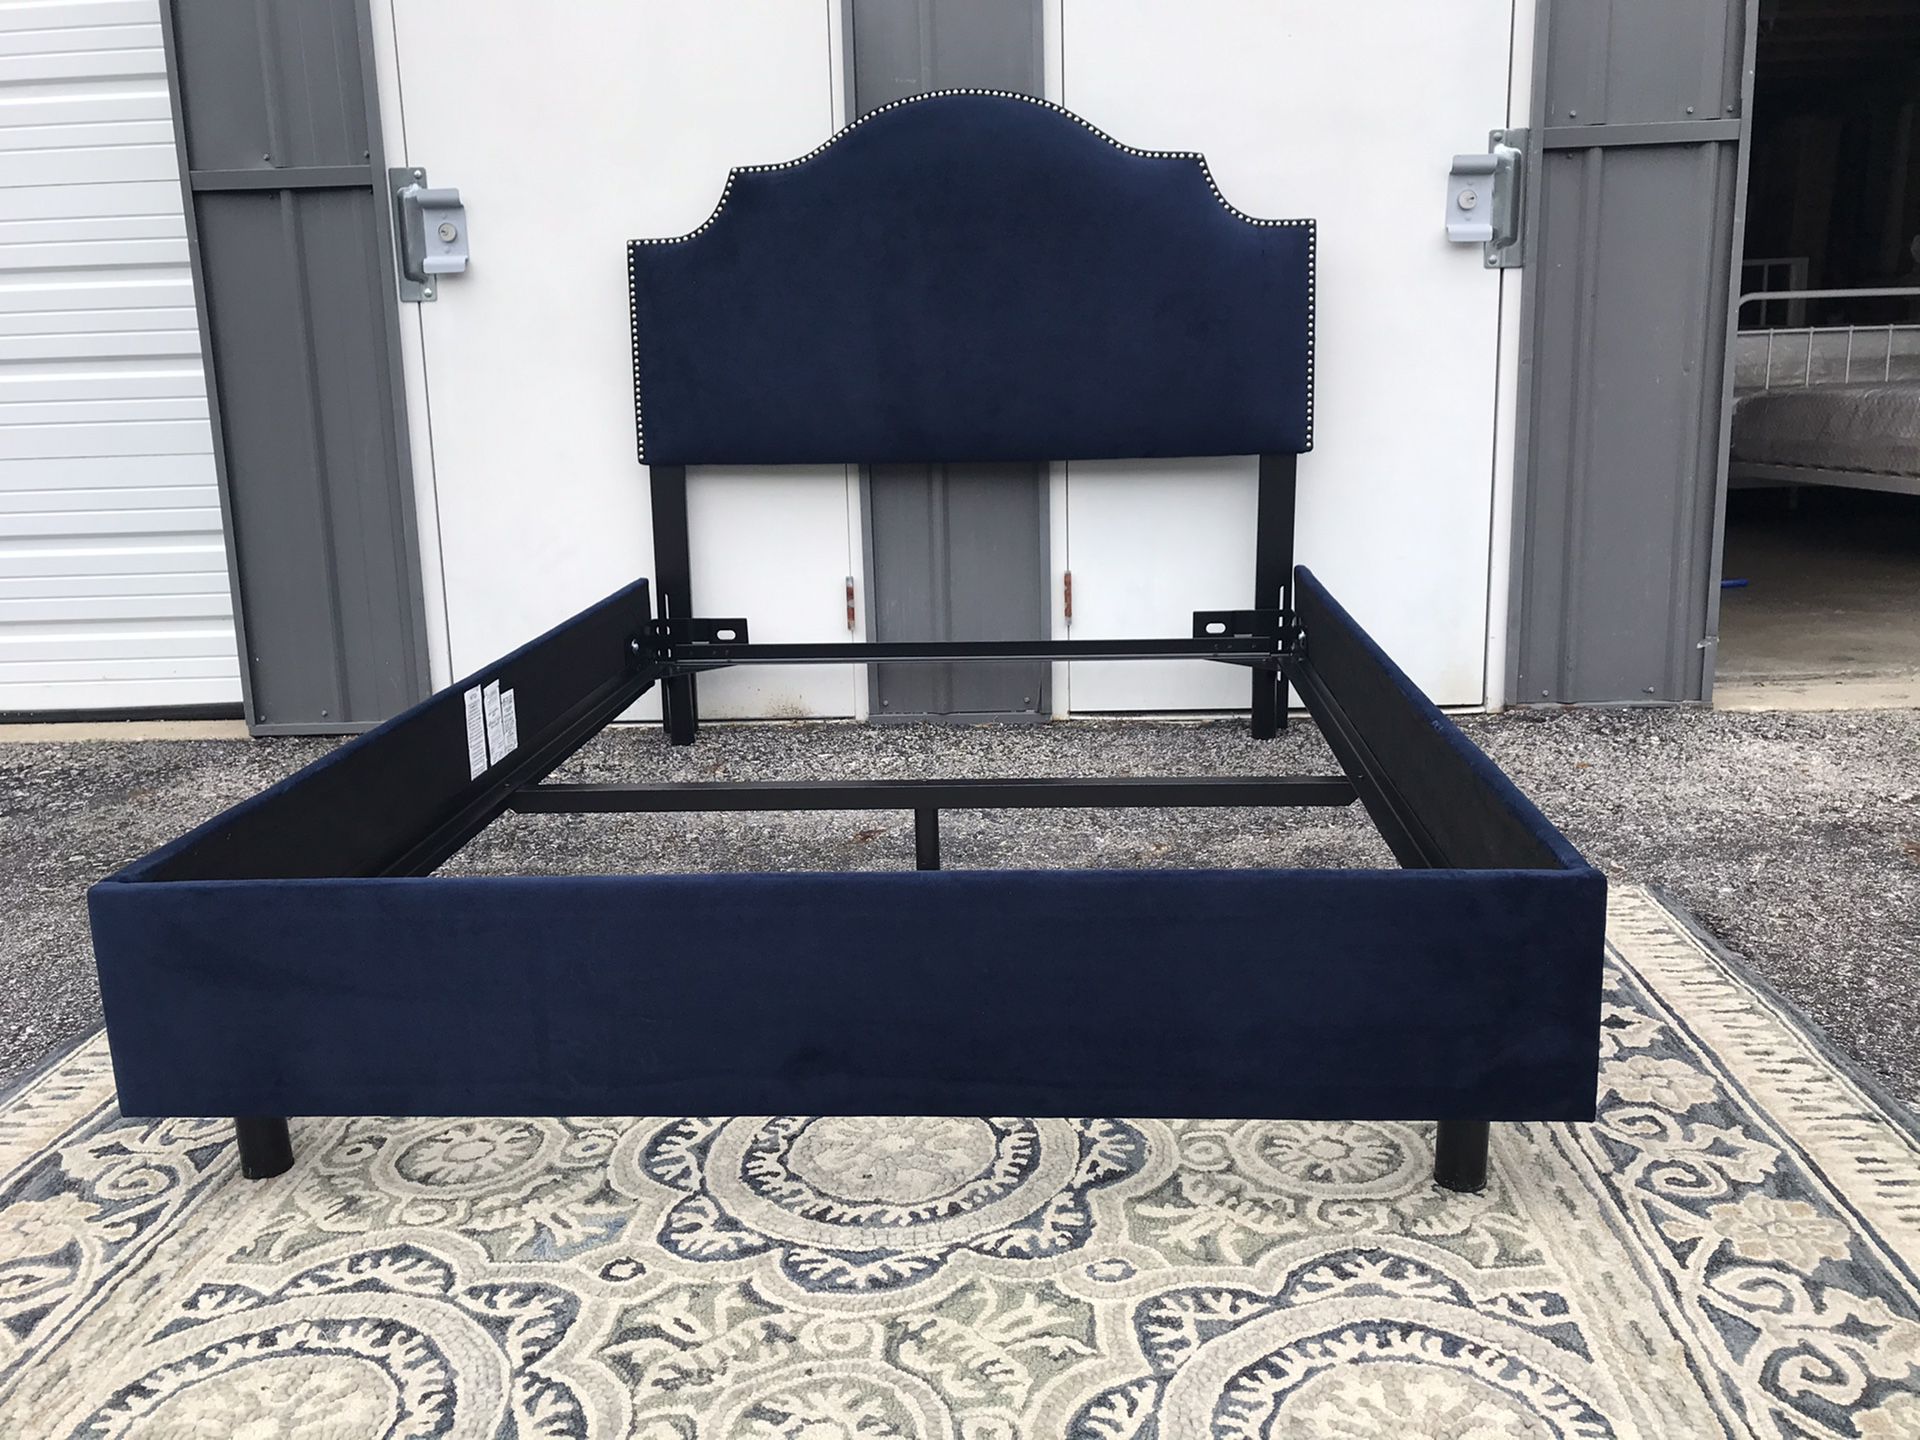 New Adorable FULL size bed frame with headboard